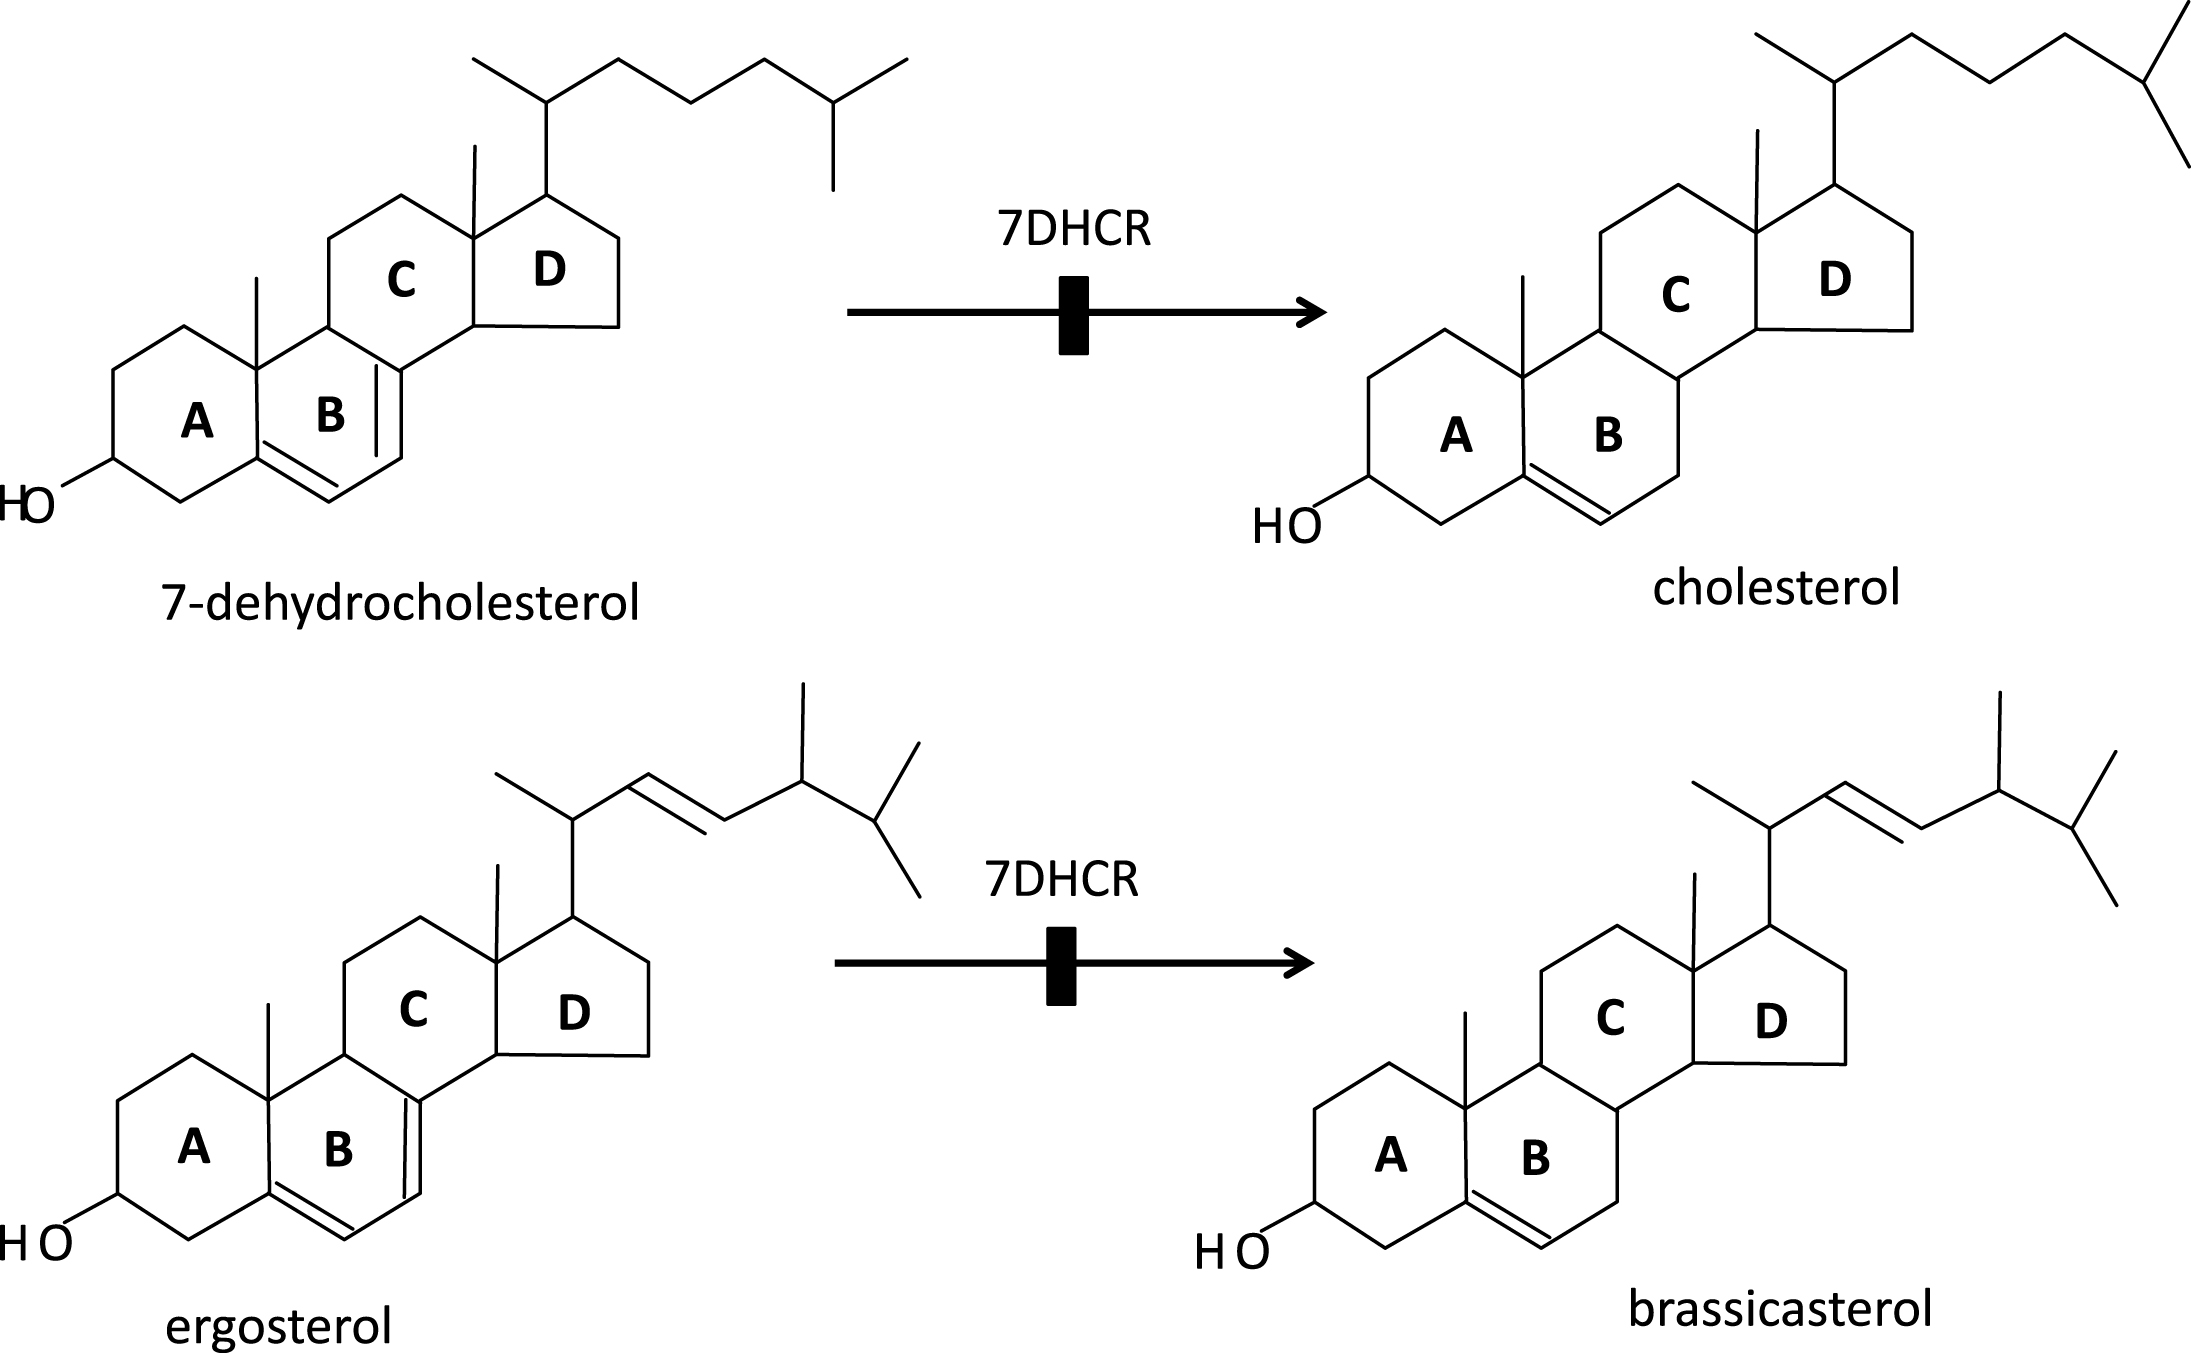 a: Humans; inability to convert 7-dehydrocholesterol to cholesterol due to mutant 7-dehydrocholesterol reductase causes RSH (so-called Smith-Lemli-Opitz, SLO) syndrome in the homozygous survivors of the severe embryonic and fetal selection against them. b: Plants (Arabidopsis thaliana) corresponding deficiency of this highly conserved enzyme with inability to convert ergosterol into brassicasterol causes the dwarf 5 mutations of A. thaliana.